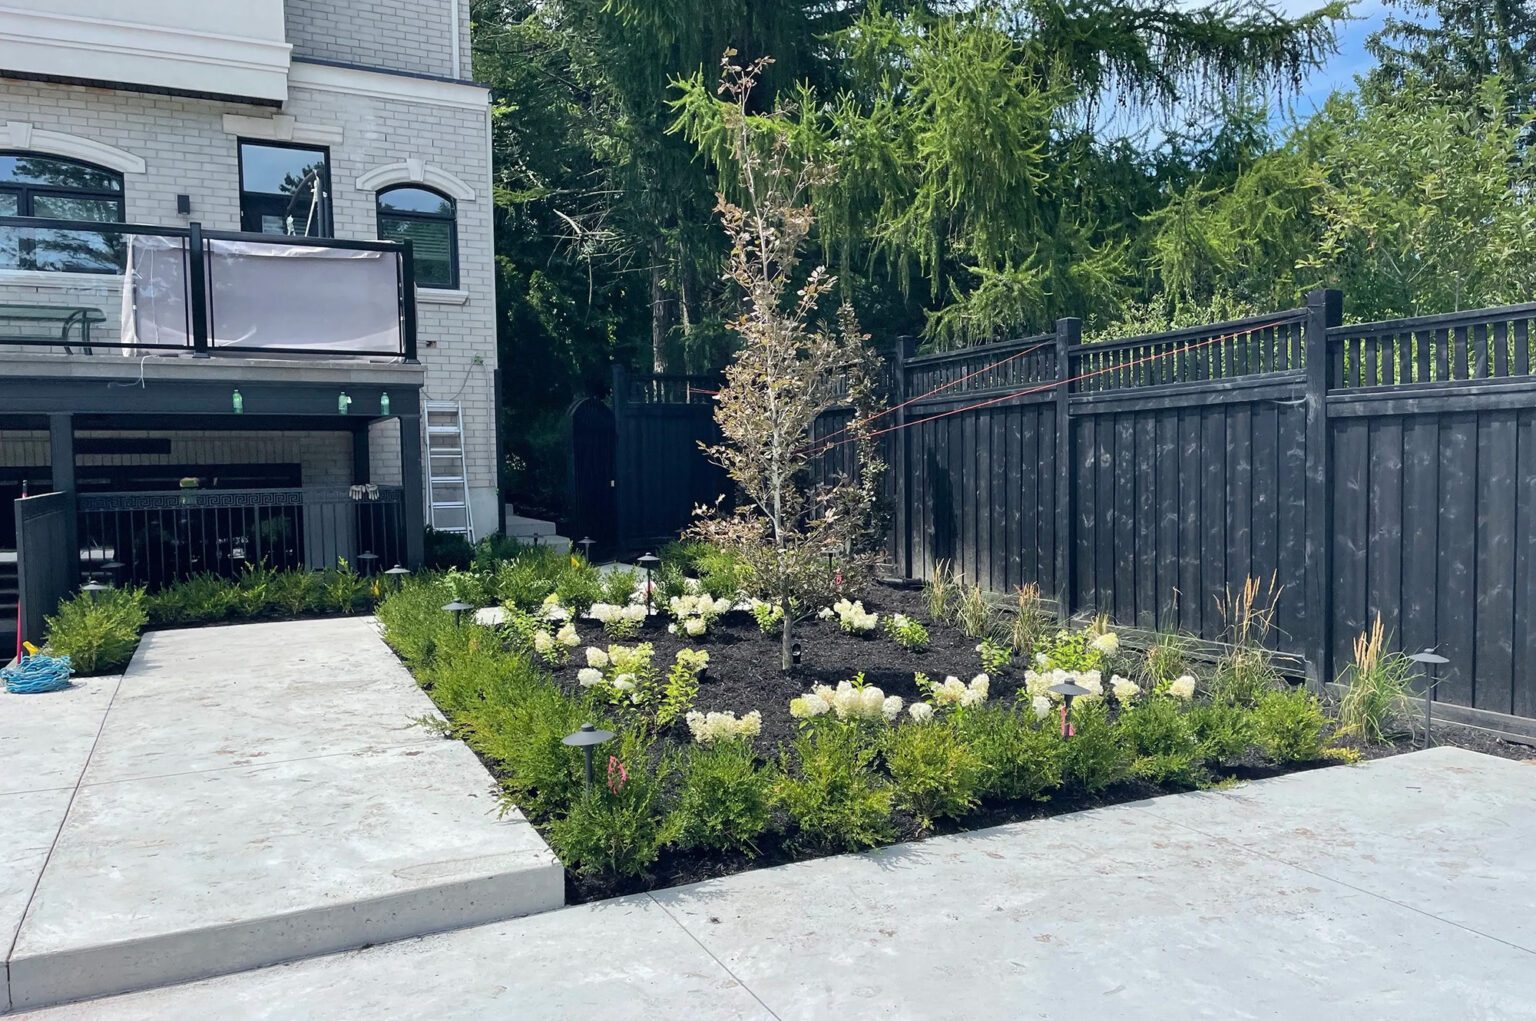 Garden bed maintenance by Gladstone Property Services in the Greater Toronto Area